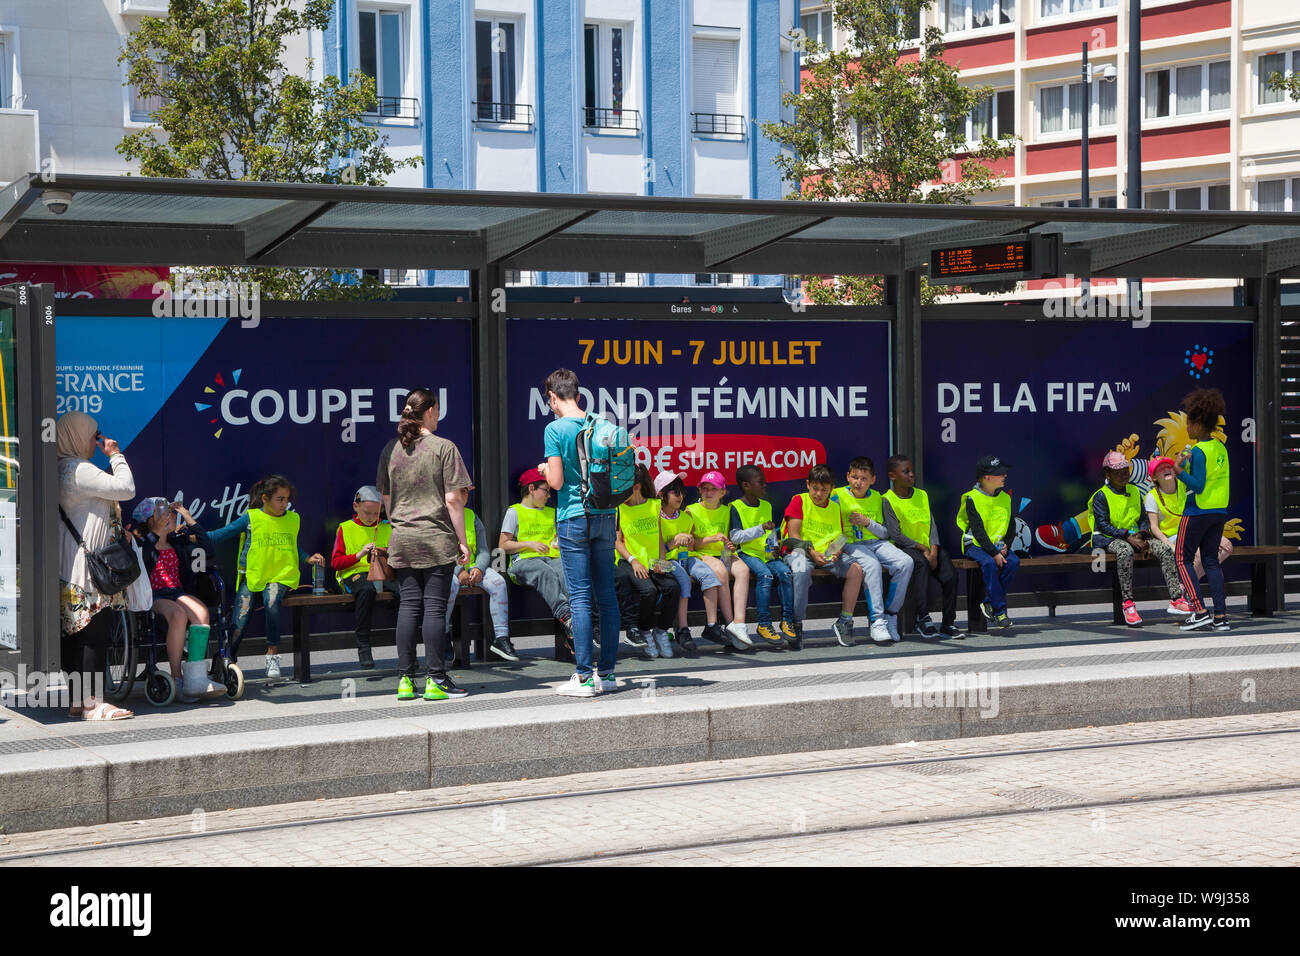 School children in yellow fluorescent jackets wait afor a tram opposite the train station in Le Havre, France with an advert for the Fifa Women's Worl Stock Photo